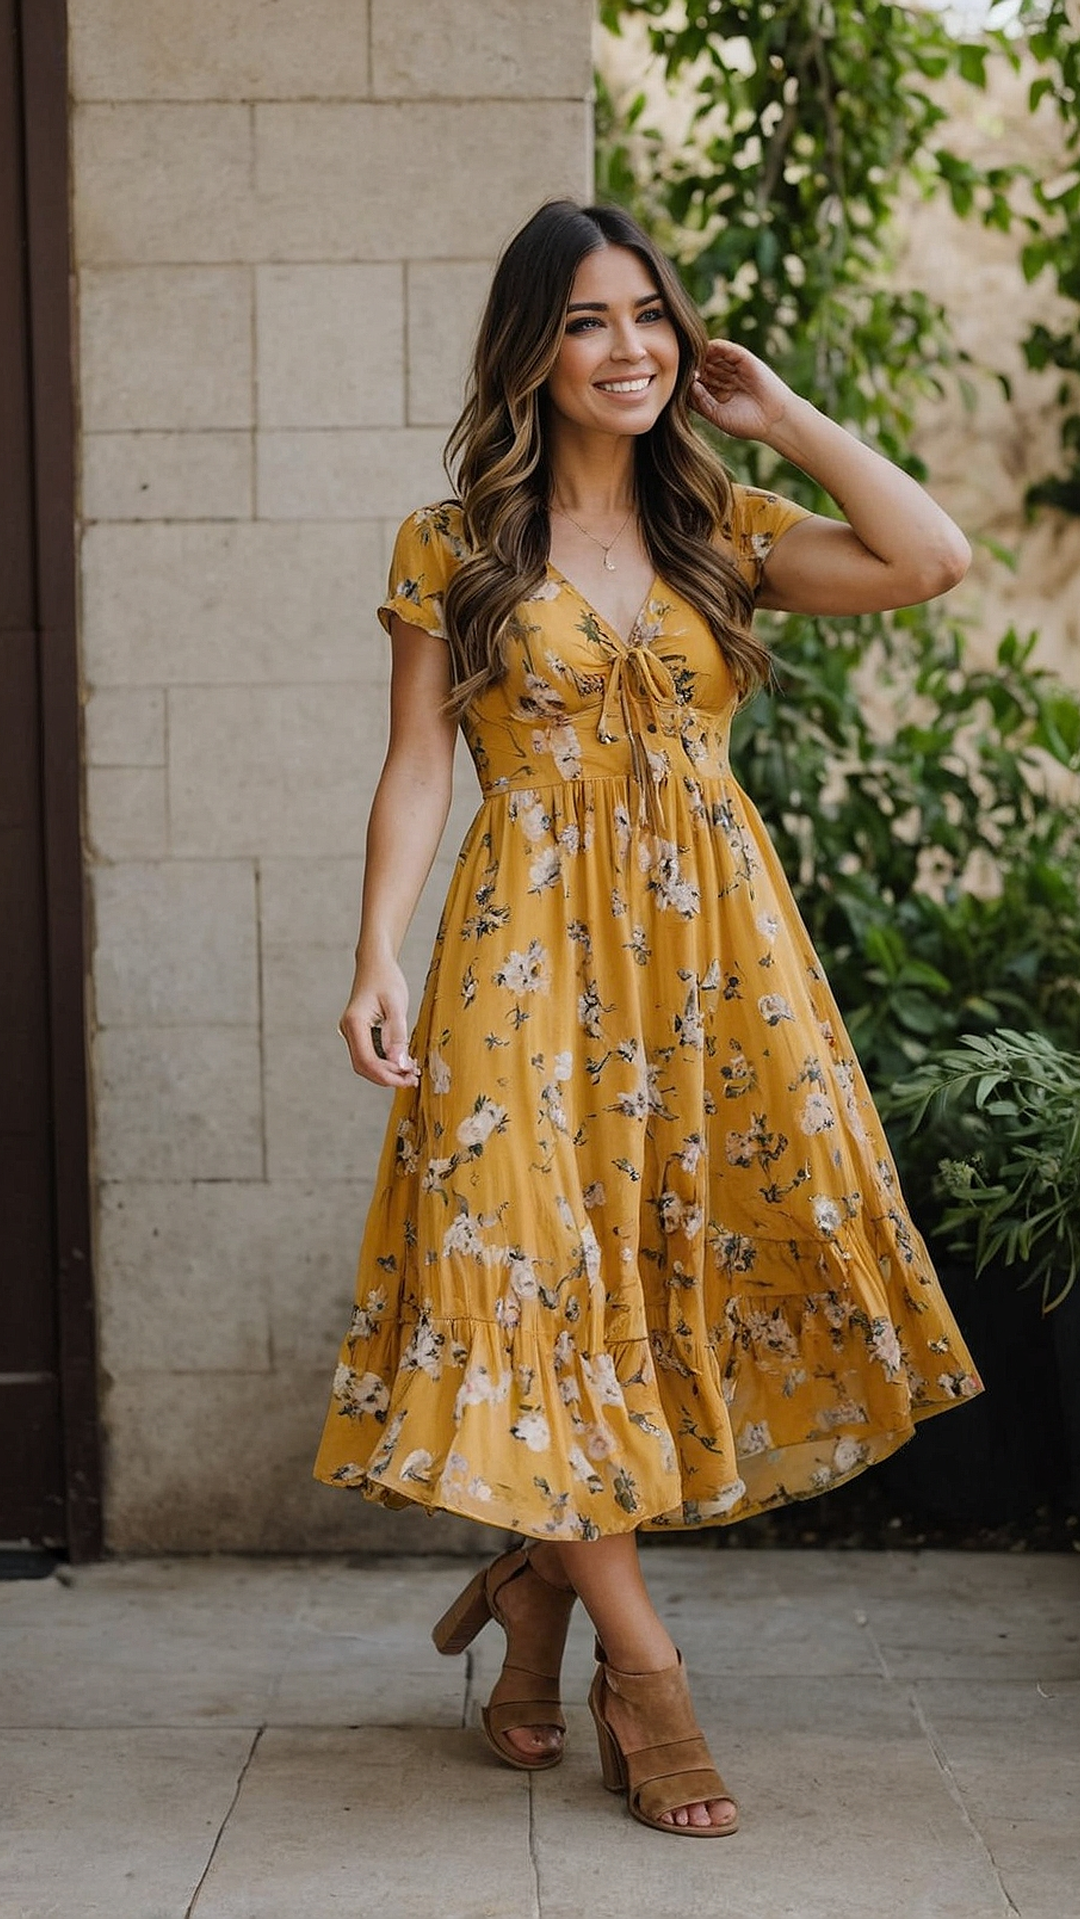 Blossom in Style: Floral Maxi Dress Picks